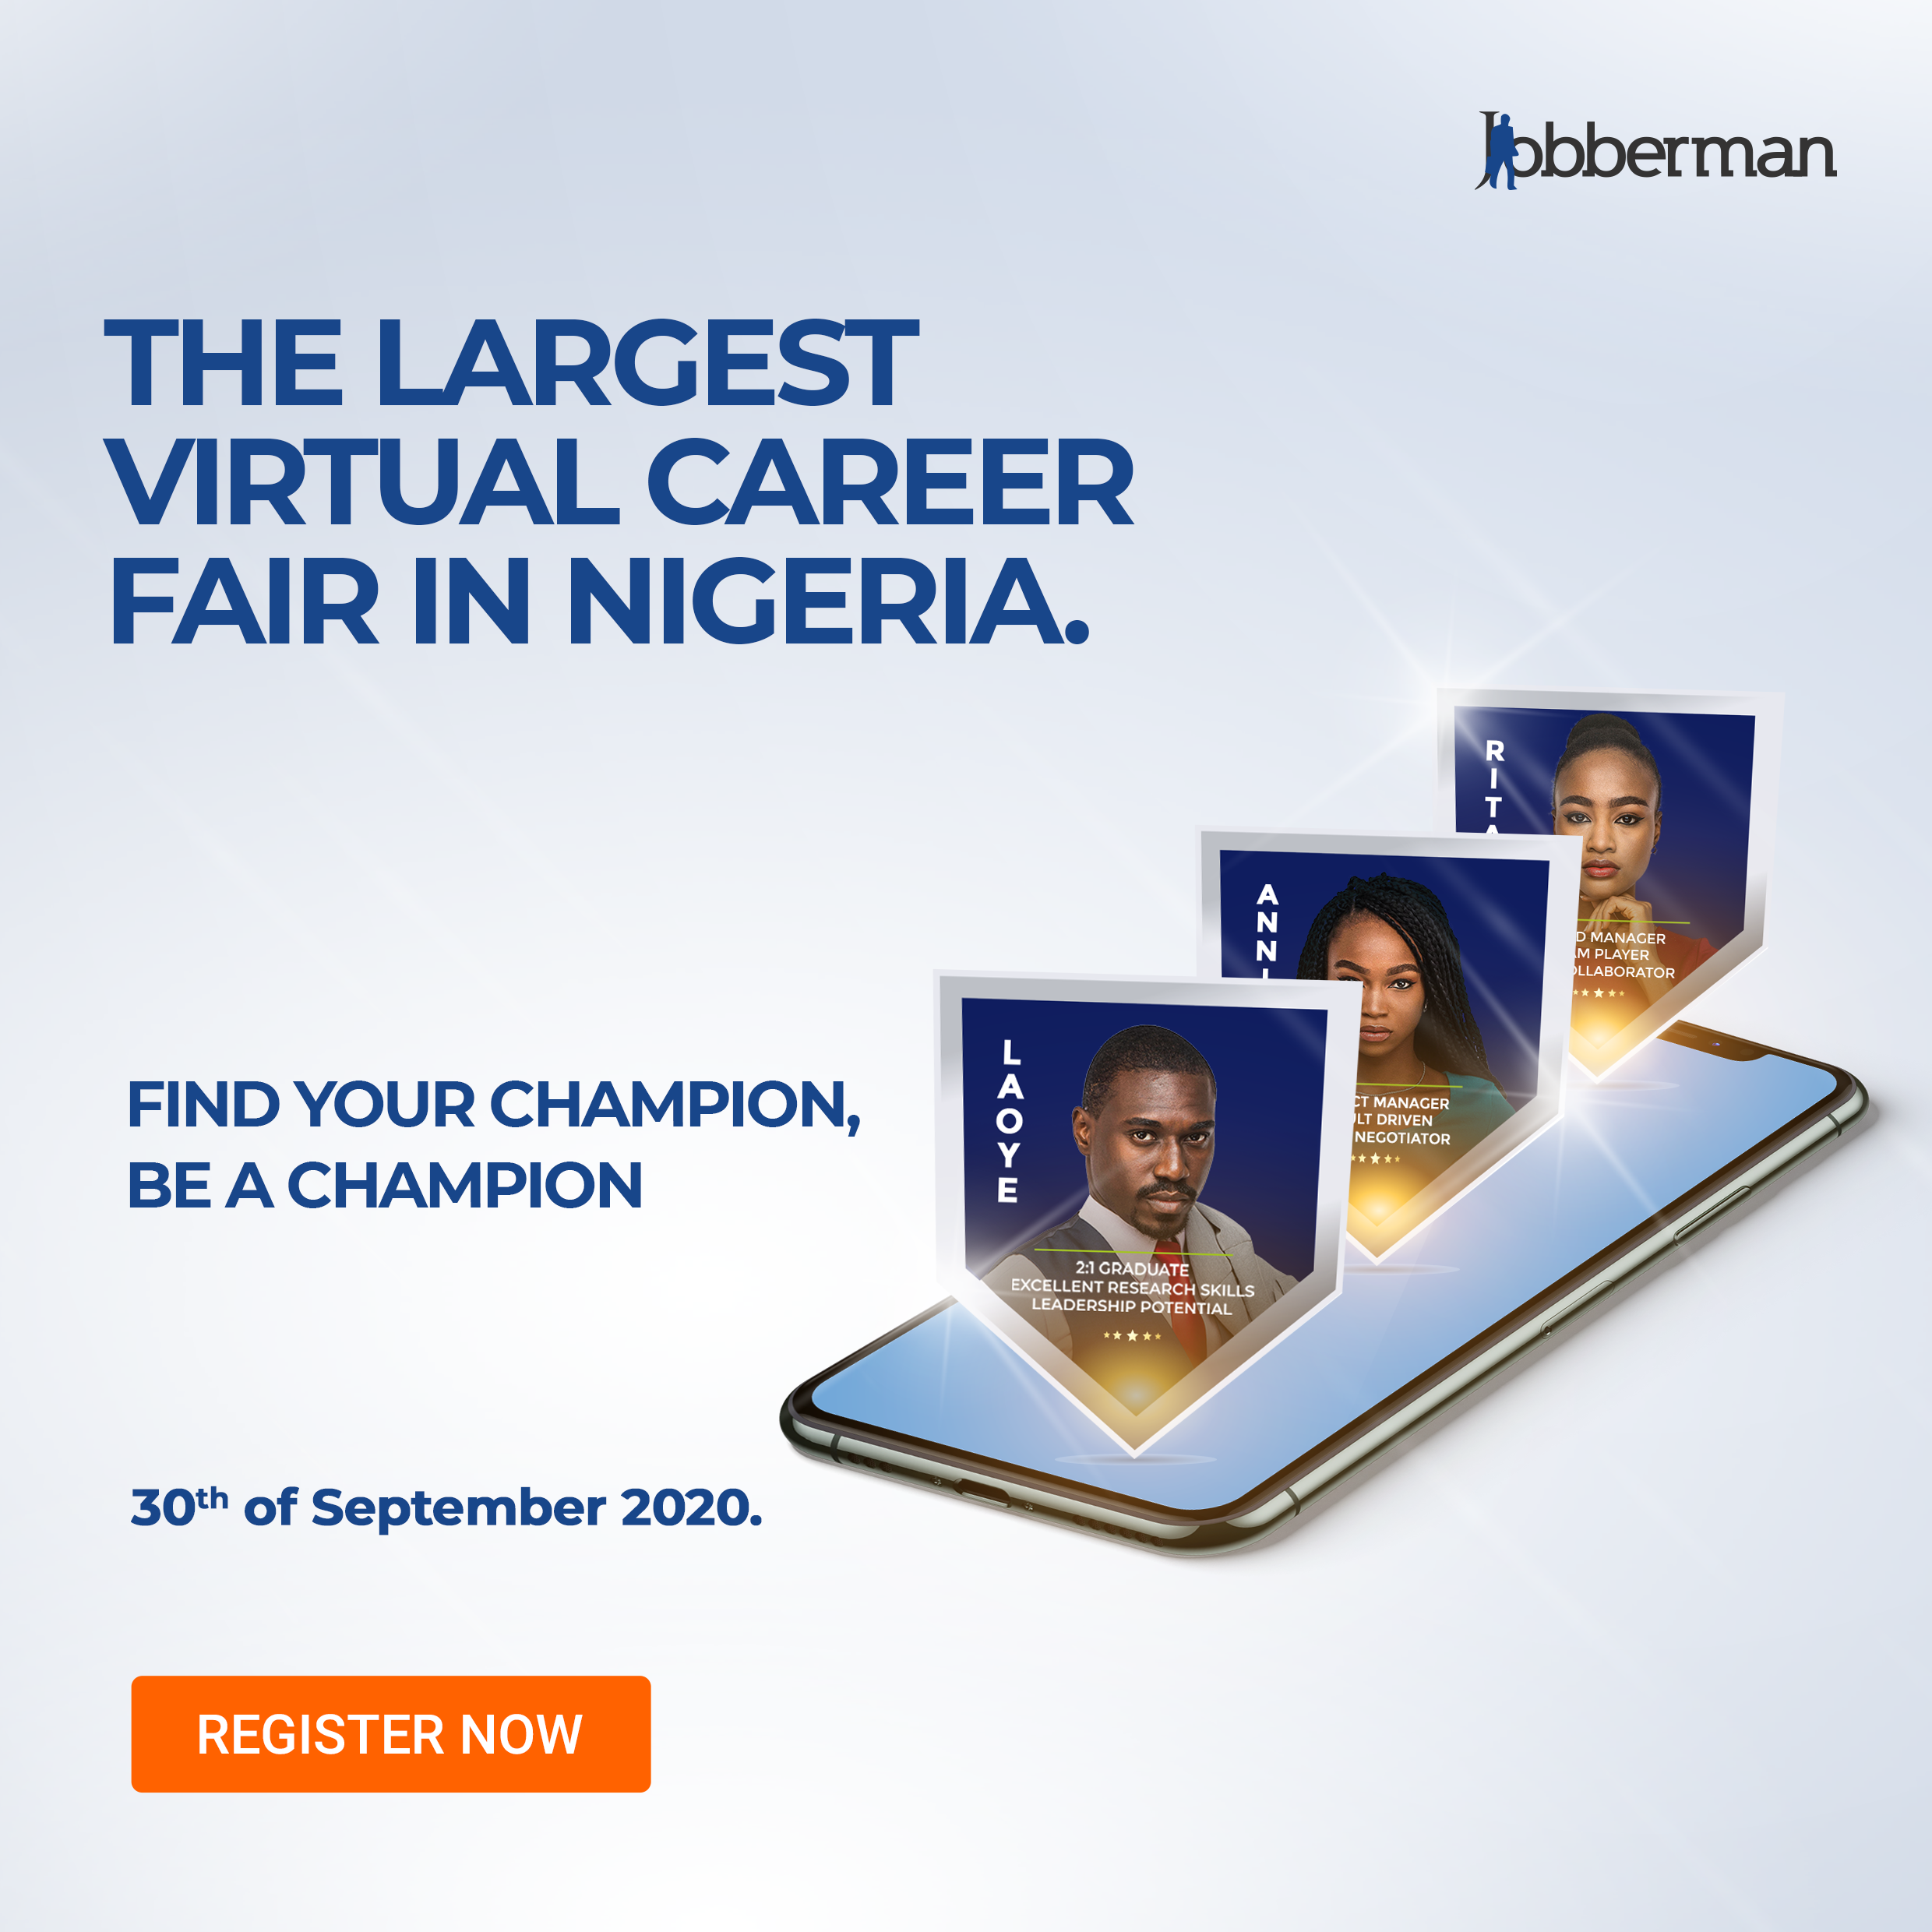 Nigeria’s Leading Online Training and Job Placement Website to Host 250 Employers and 10,000 Jobseekers Online on 30th September 2020